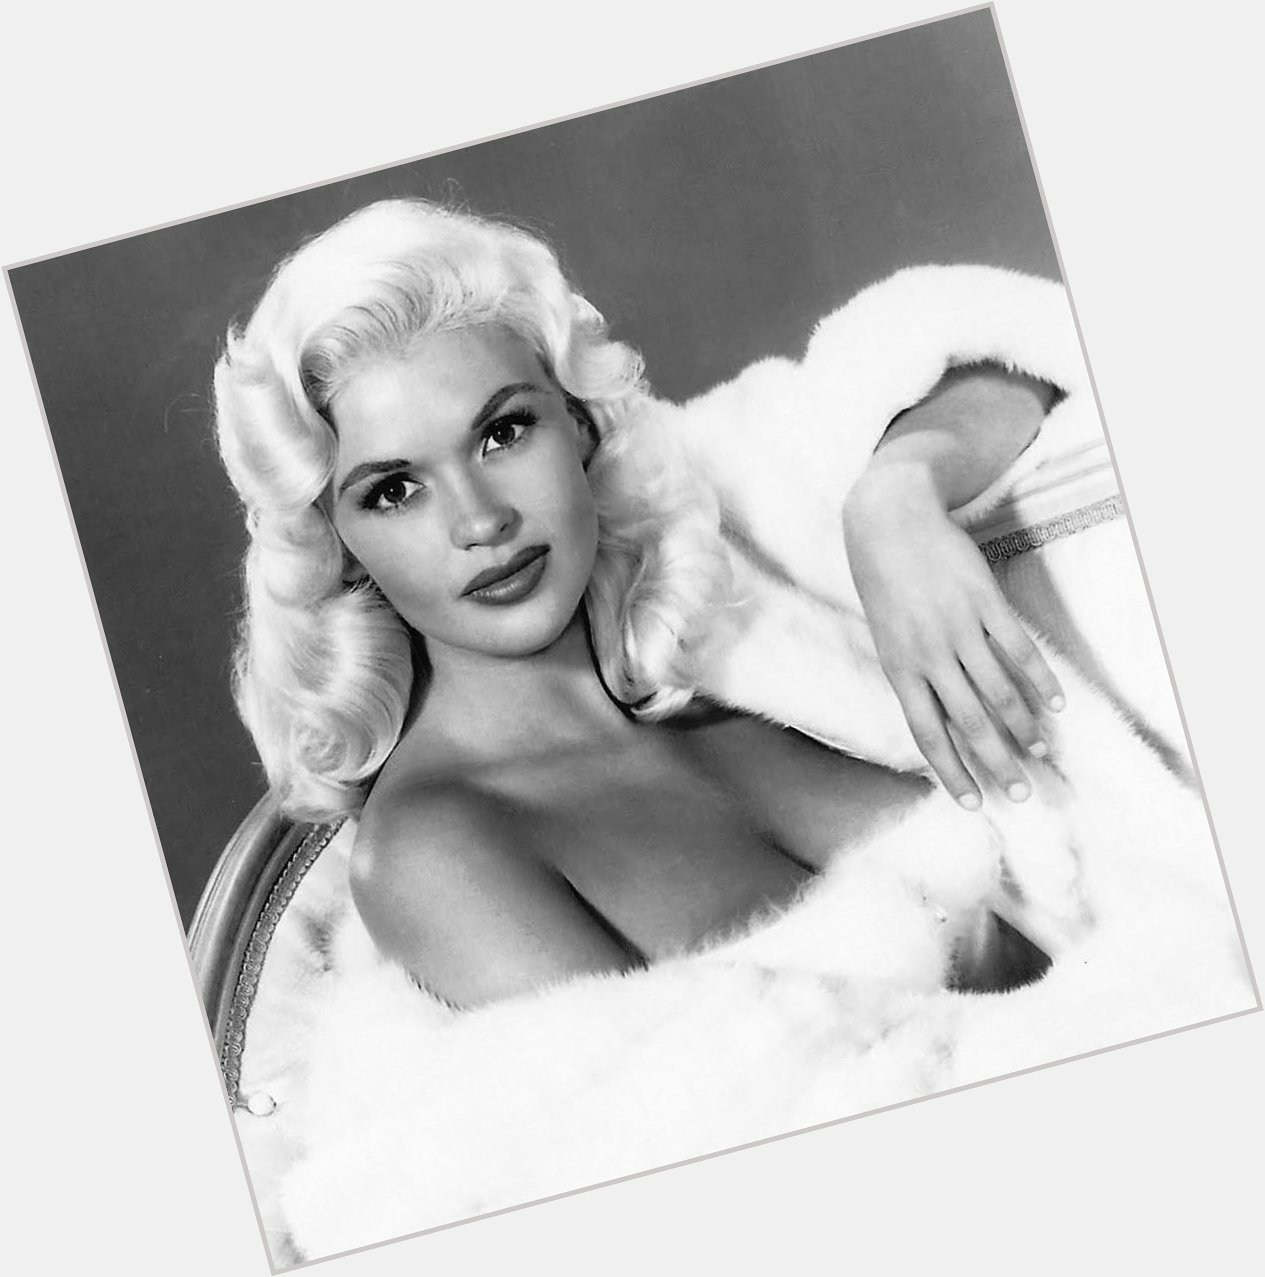 Happy heavenly birthday to Jayne Mansfield! I have this gorgeous picture in my living room   